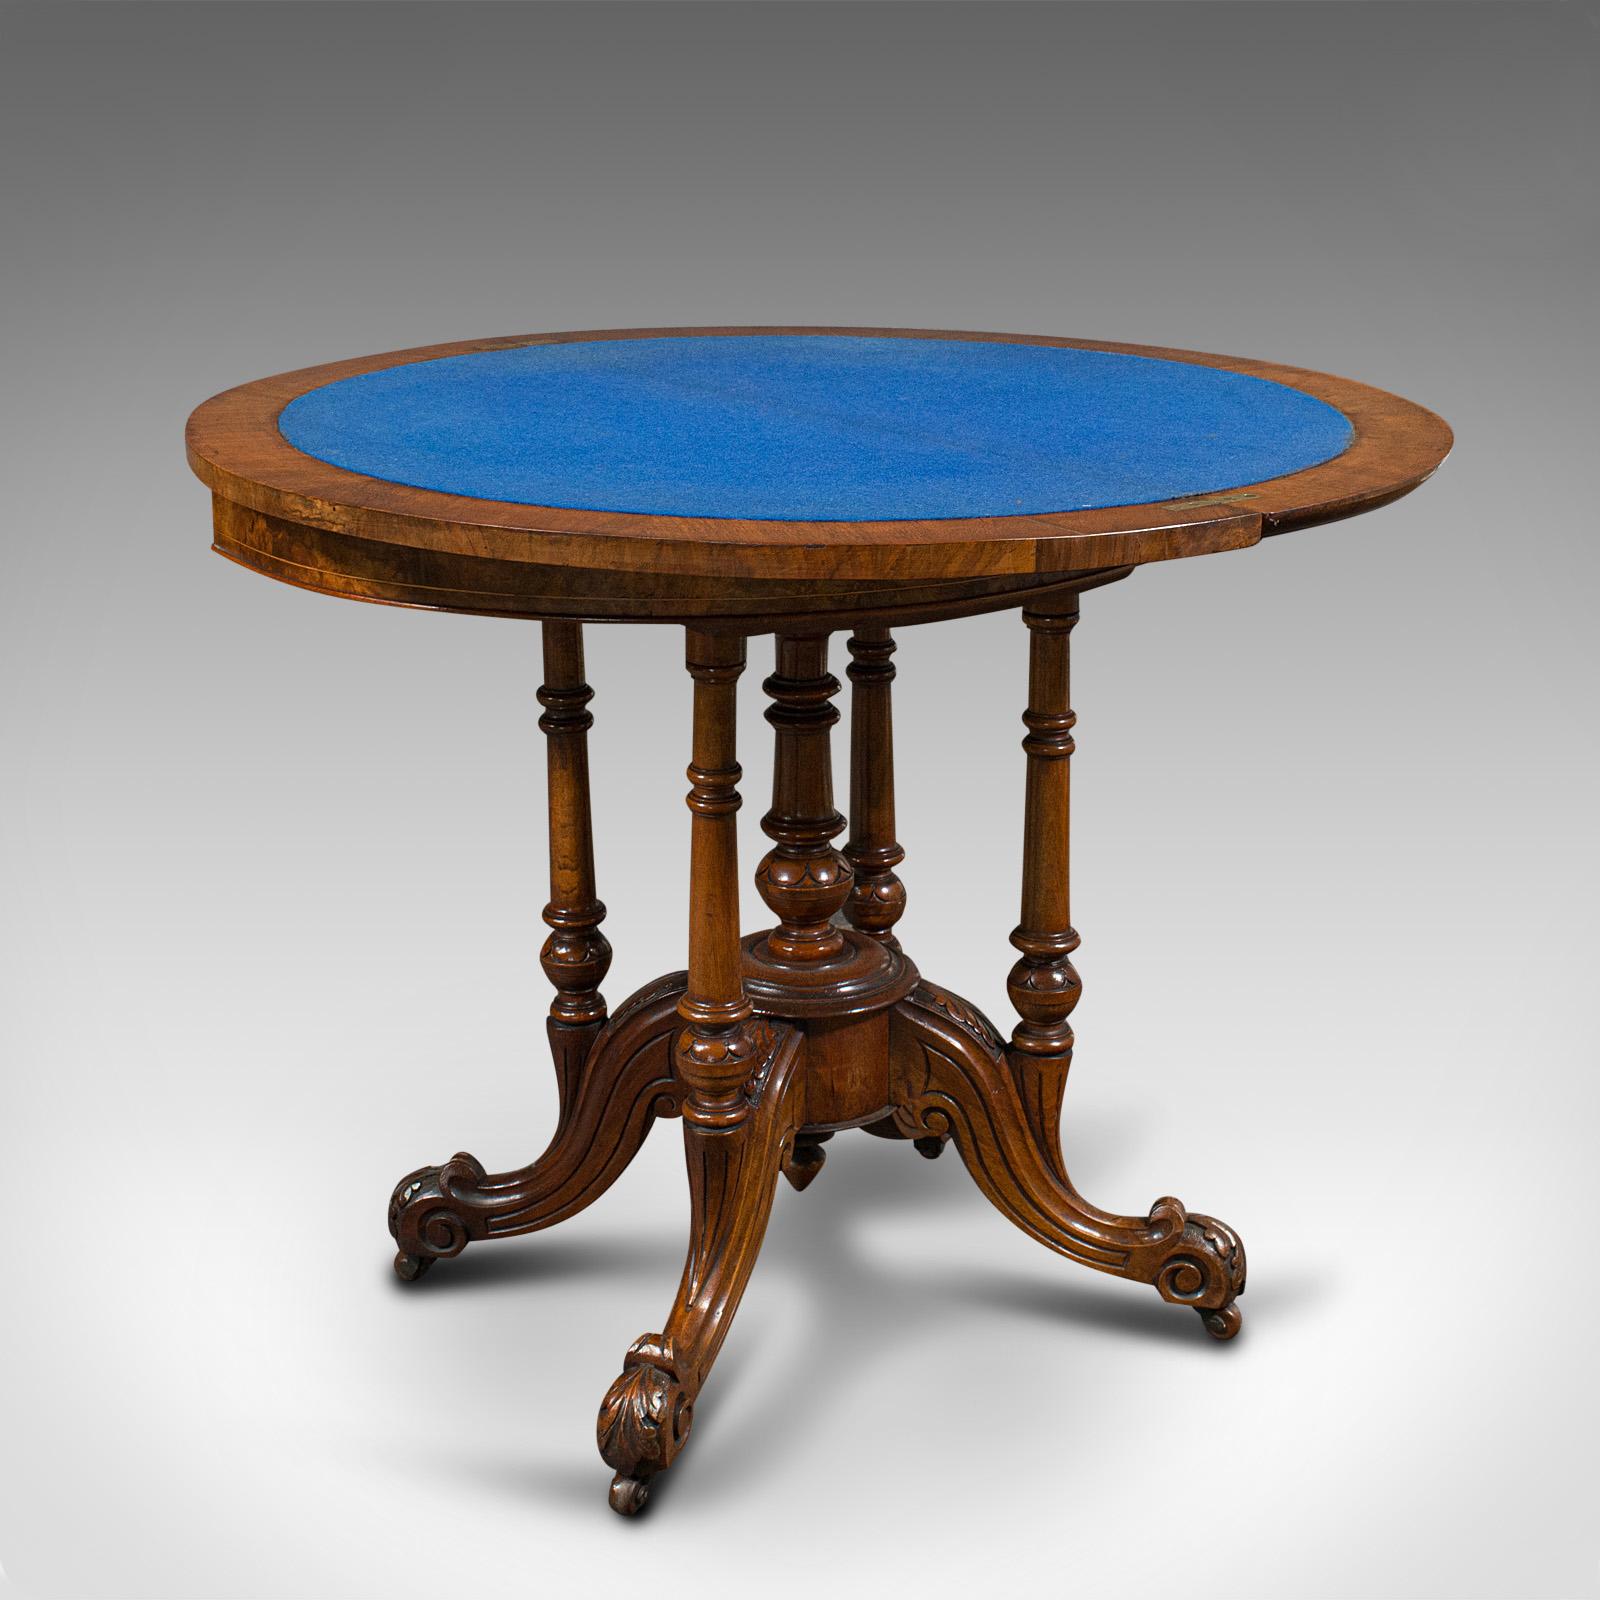 This is an antique demi-lune folding card table. An English, walnut and amboyna half-round games or side table, dating to the early Victorian period, circa 1850.

Striking and exceptional, a treat for any drawing room or club lounge
Displays a